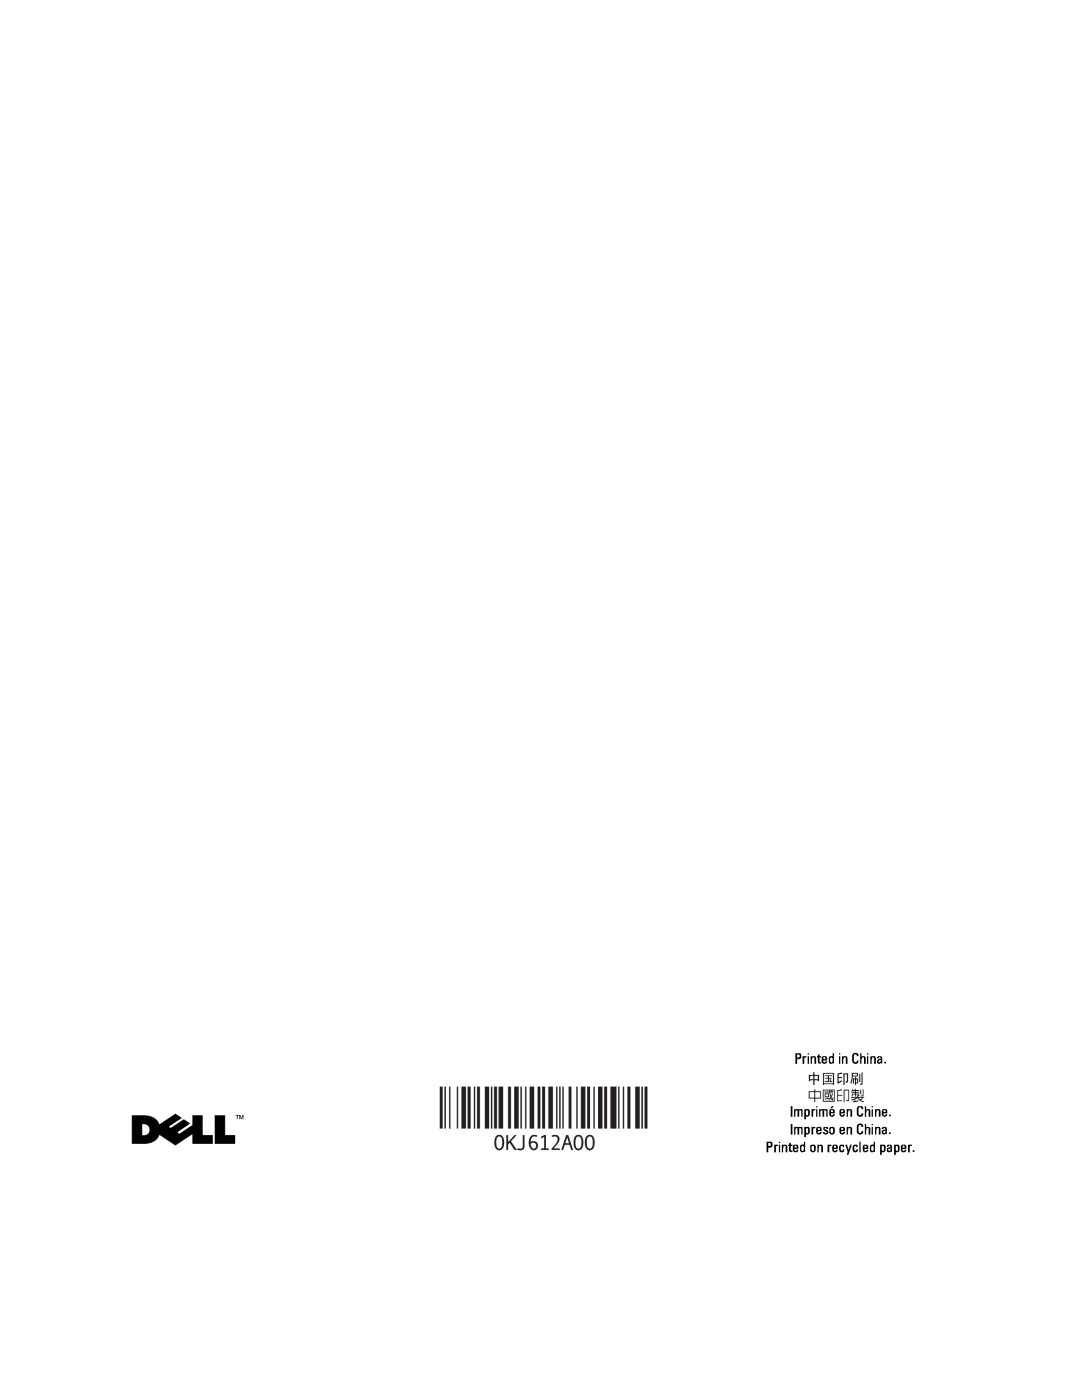 Dell Model PR09S setup guide Printed in China, 中国印刷 中國印製, Printed on recycled paper 